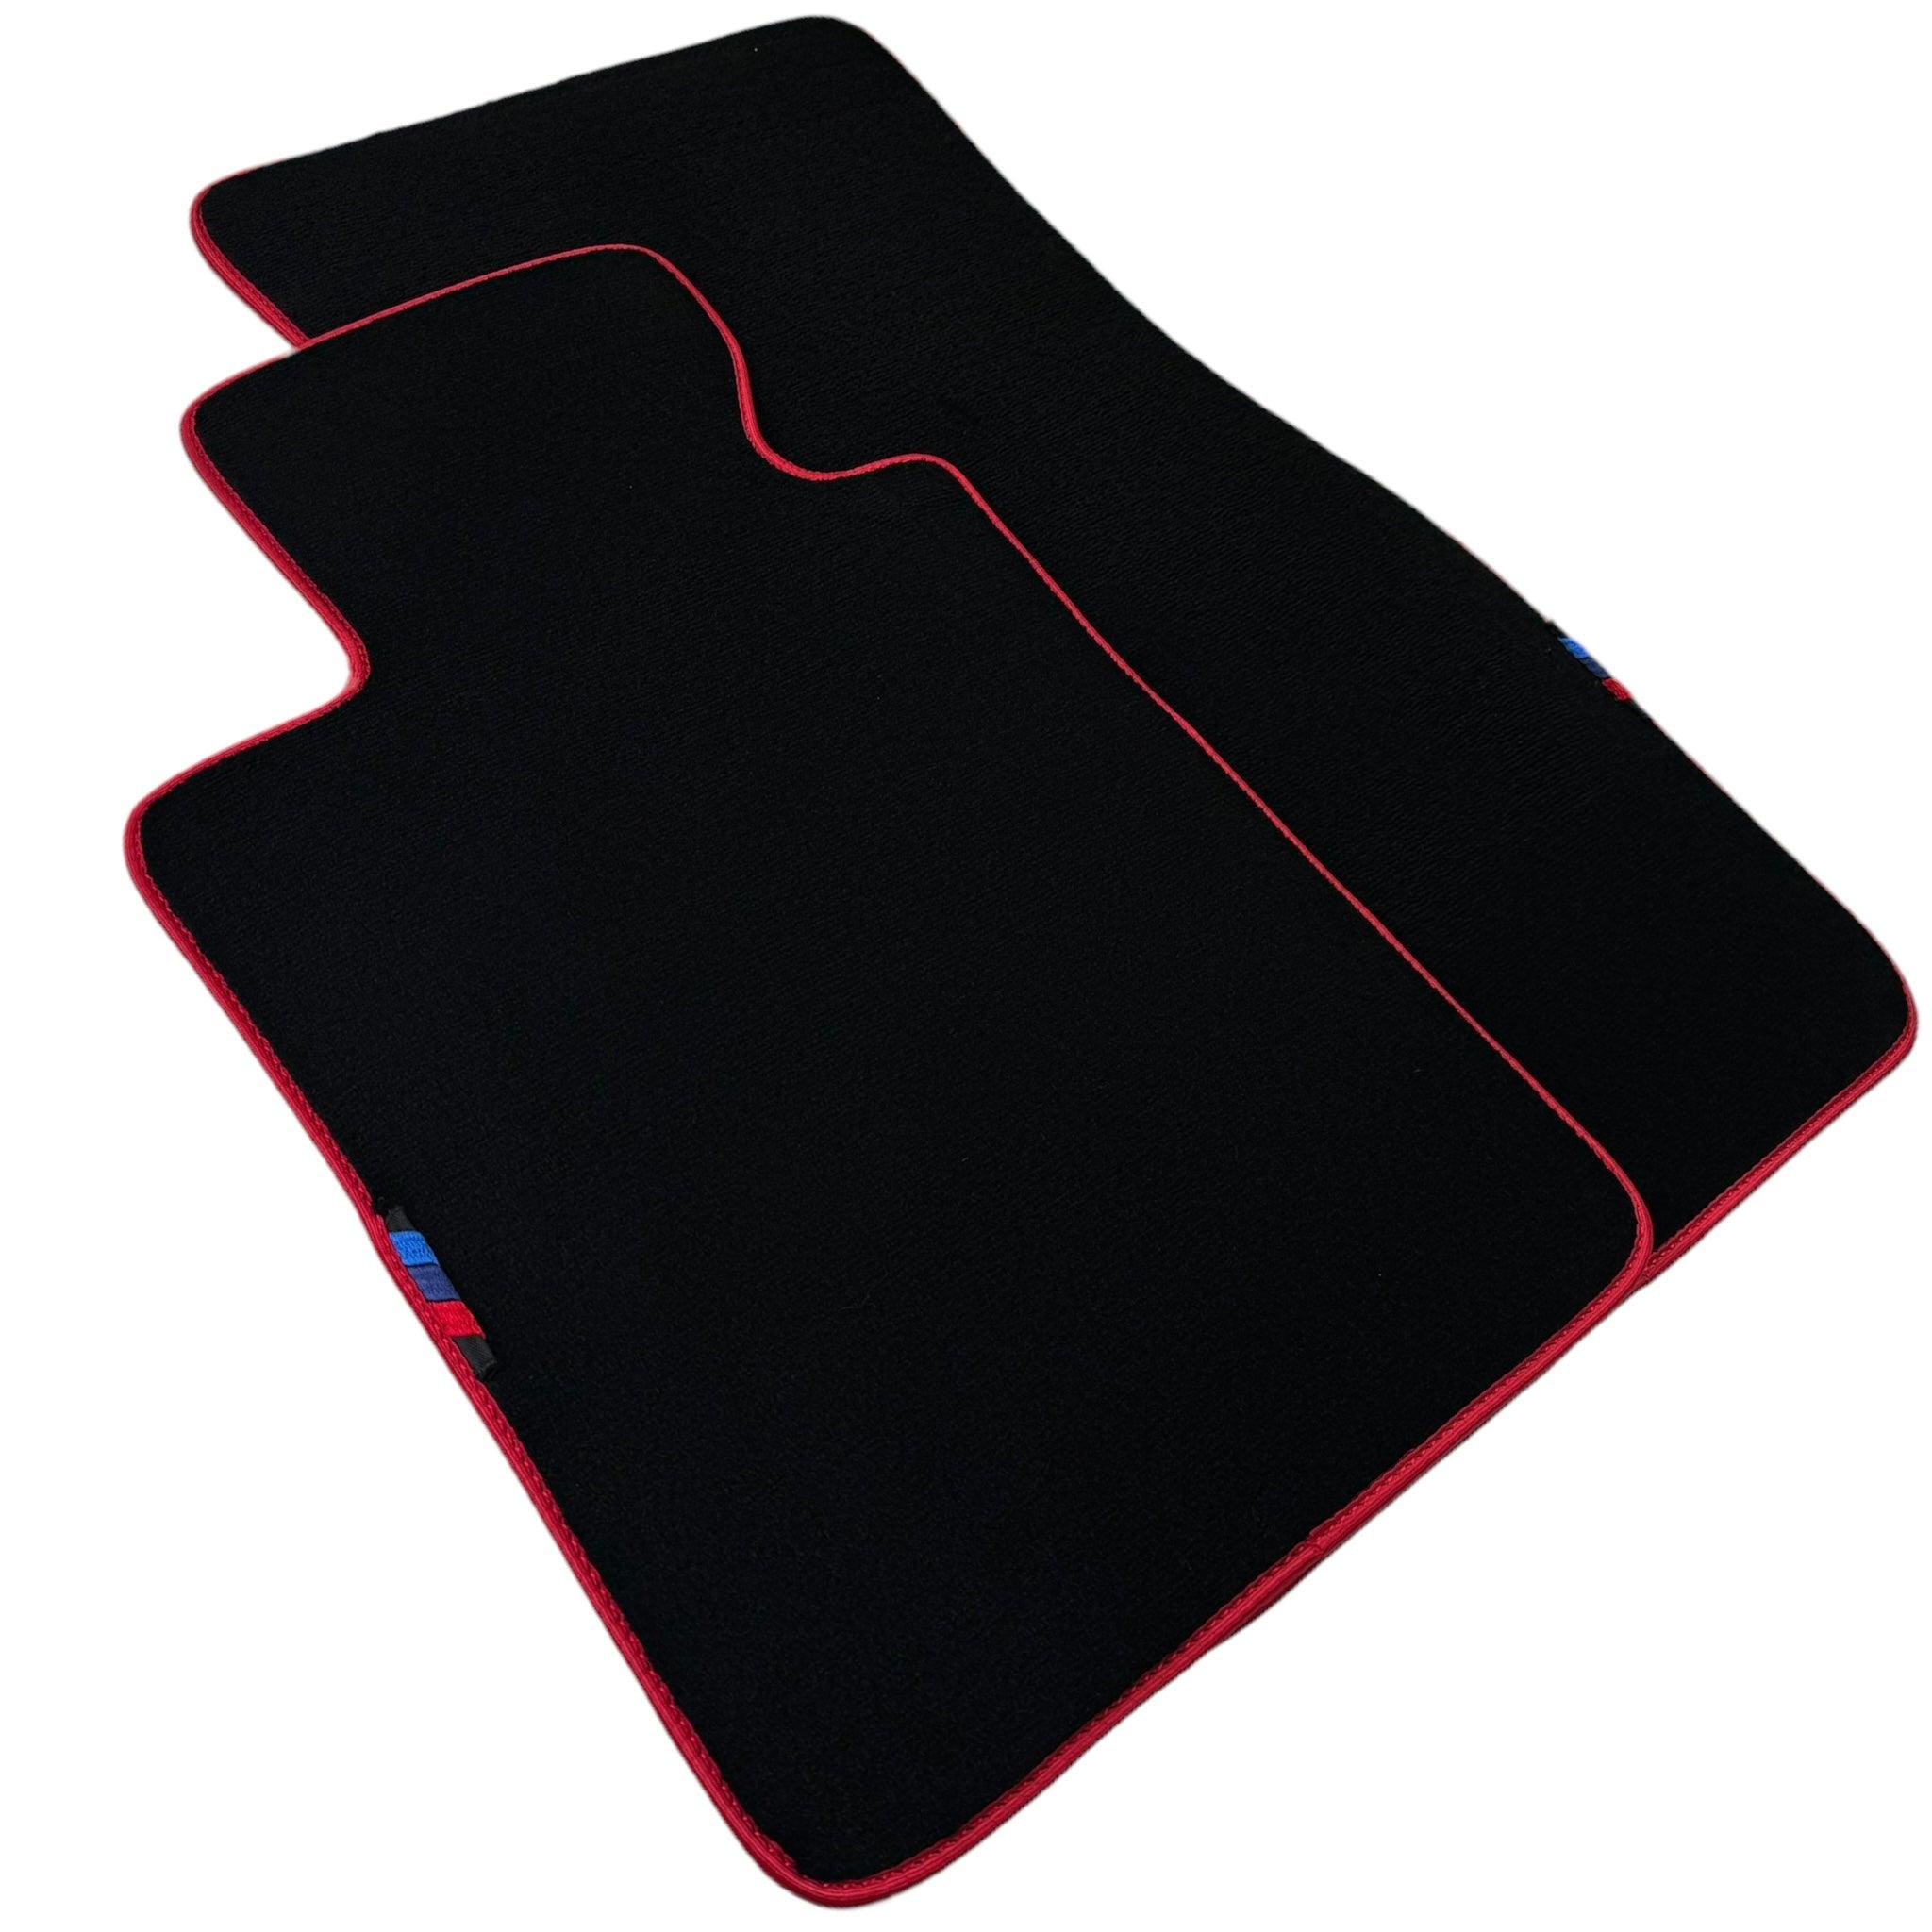 Black Floor Mats For BMW 2 Series F44 Gran Coupe | Red Trim